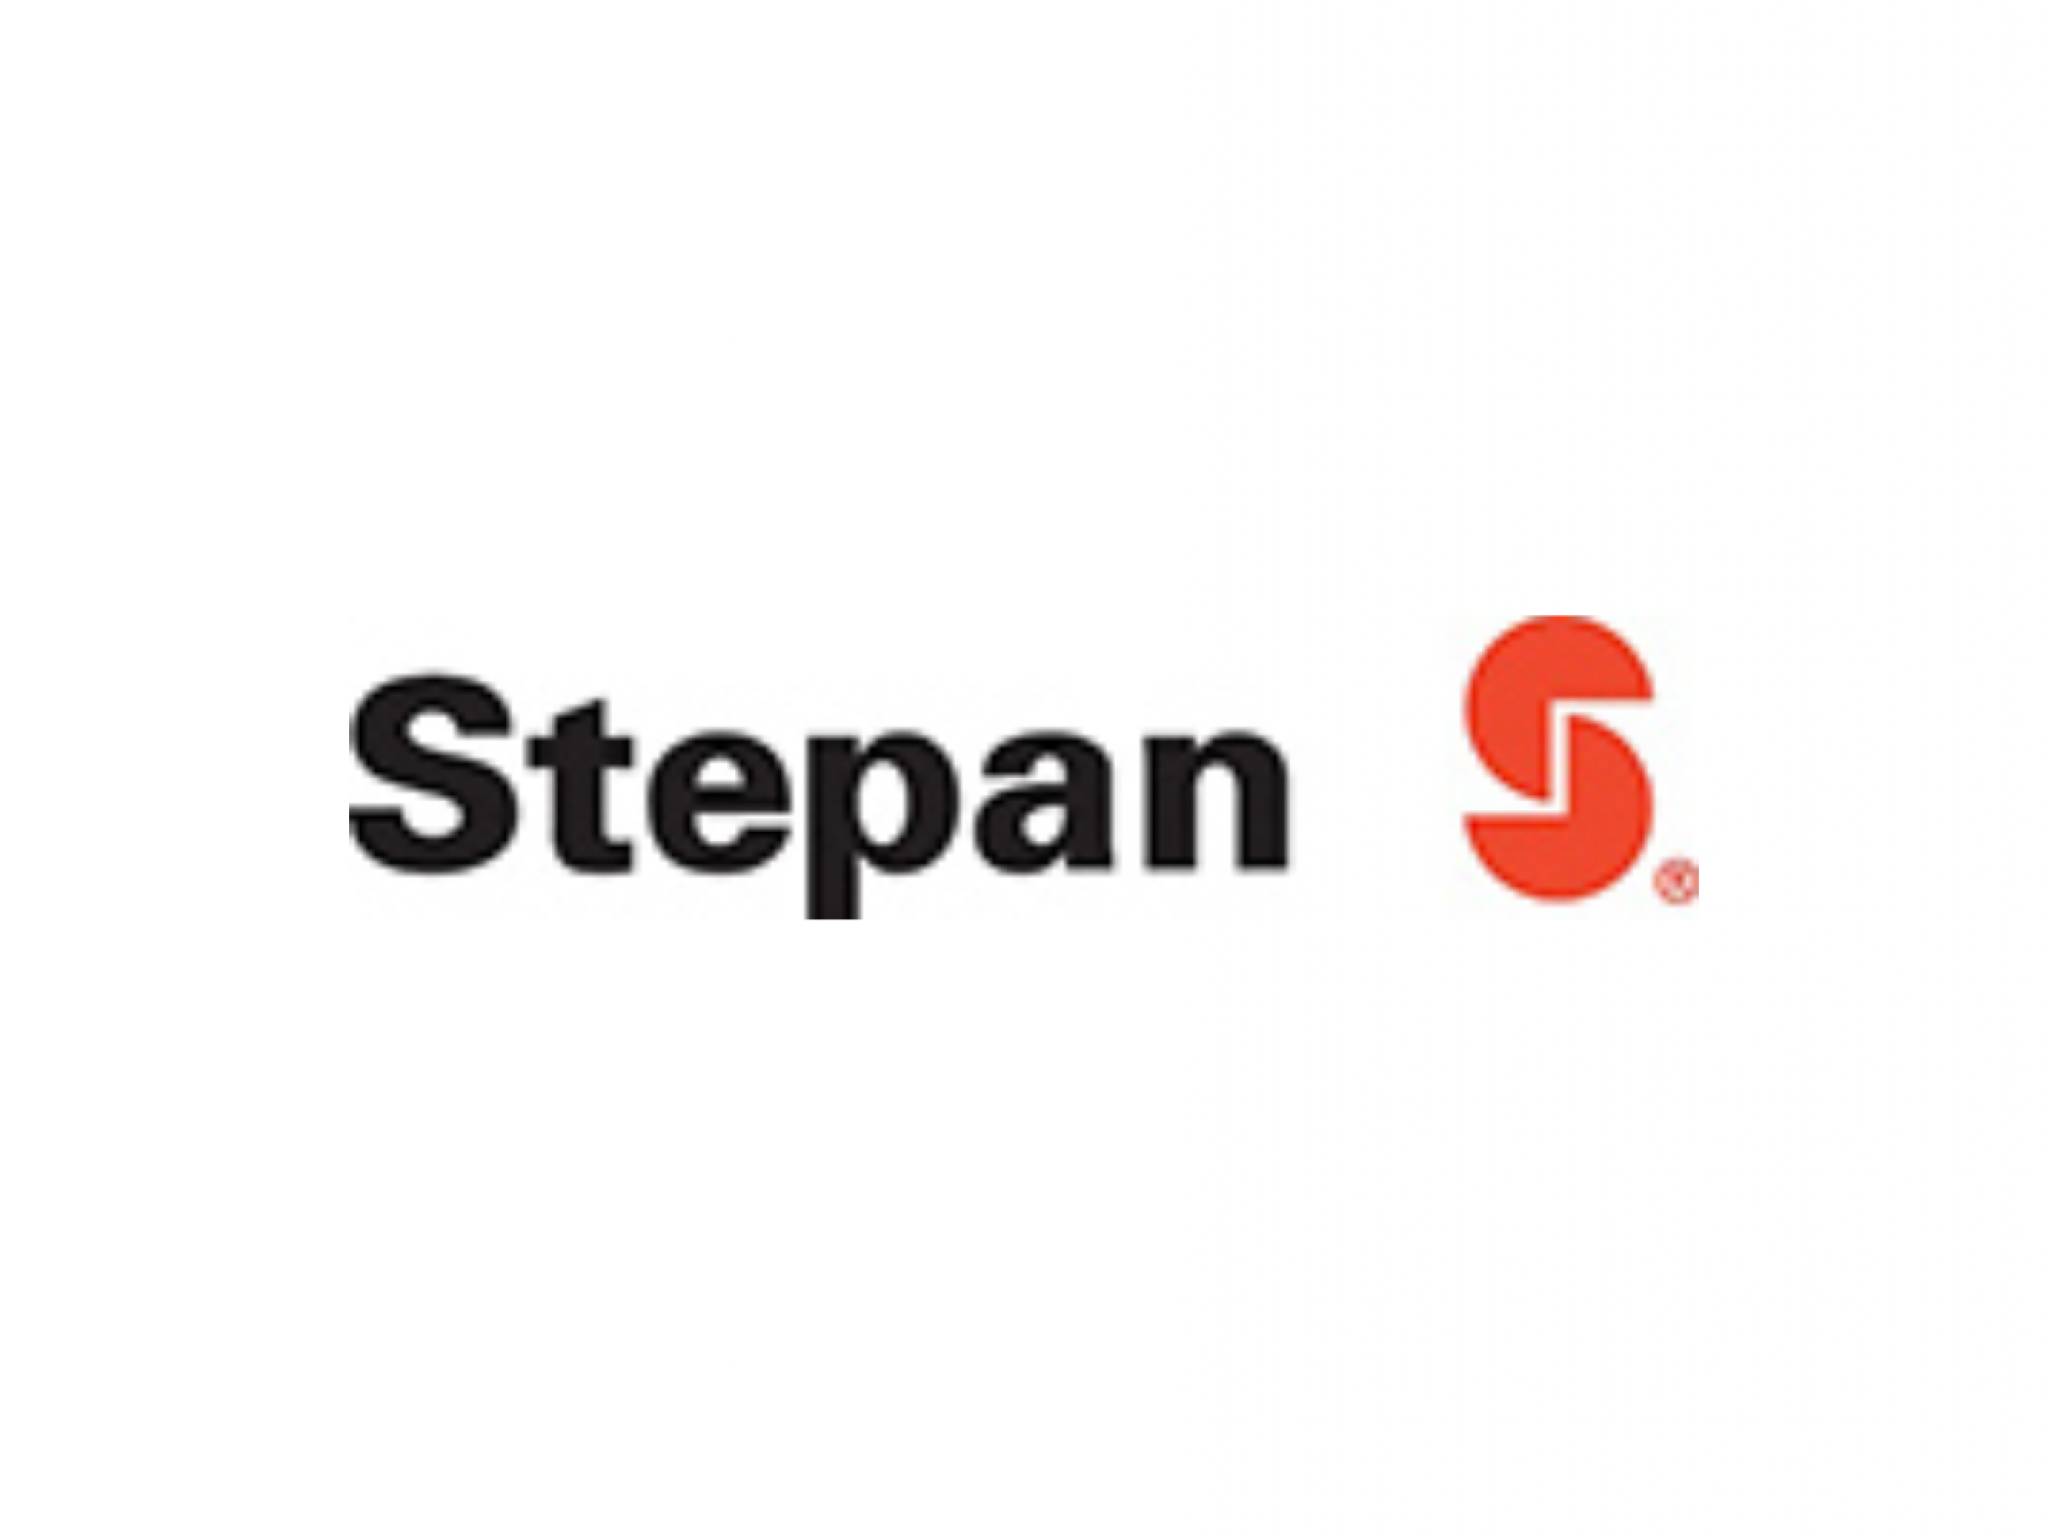  stepan-company-q3-earnings-miss-lower-sales-volume-dividend-hike--more 